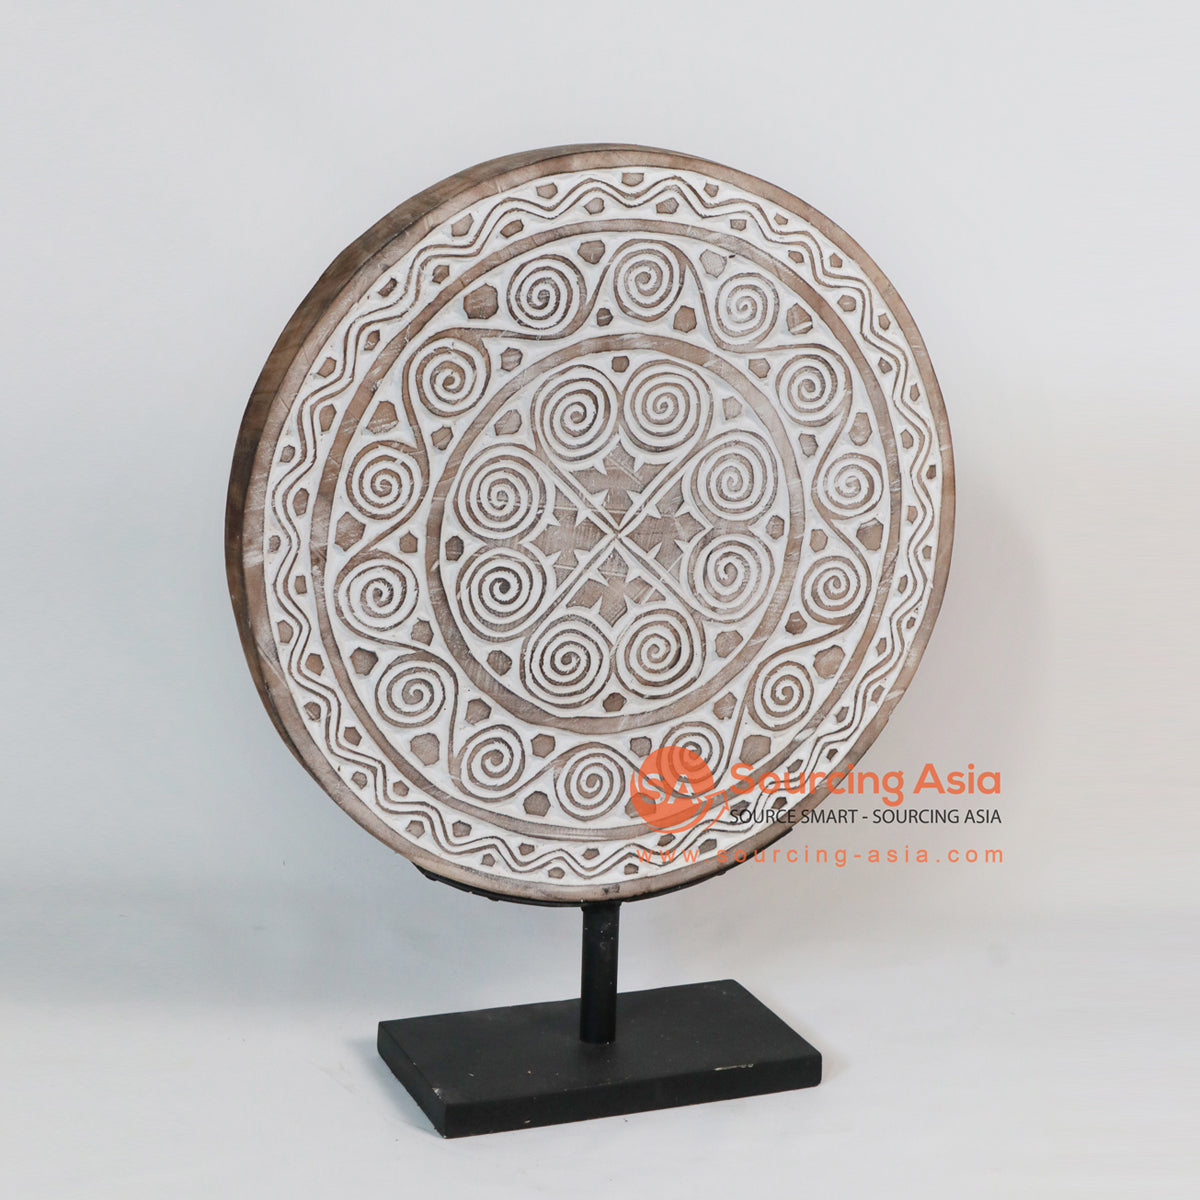 DG014 NATURAL AND WHITE WOODEN SUMBA MOTIVE ROUND ON STAND DECORATION